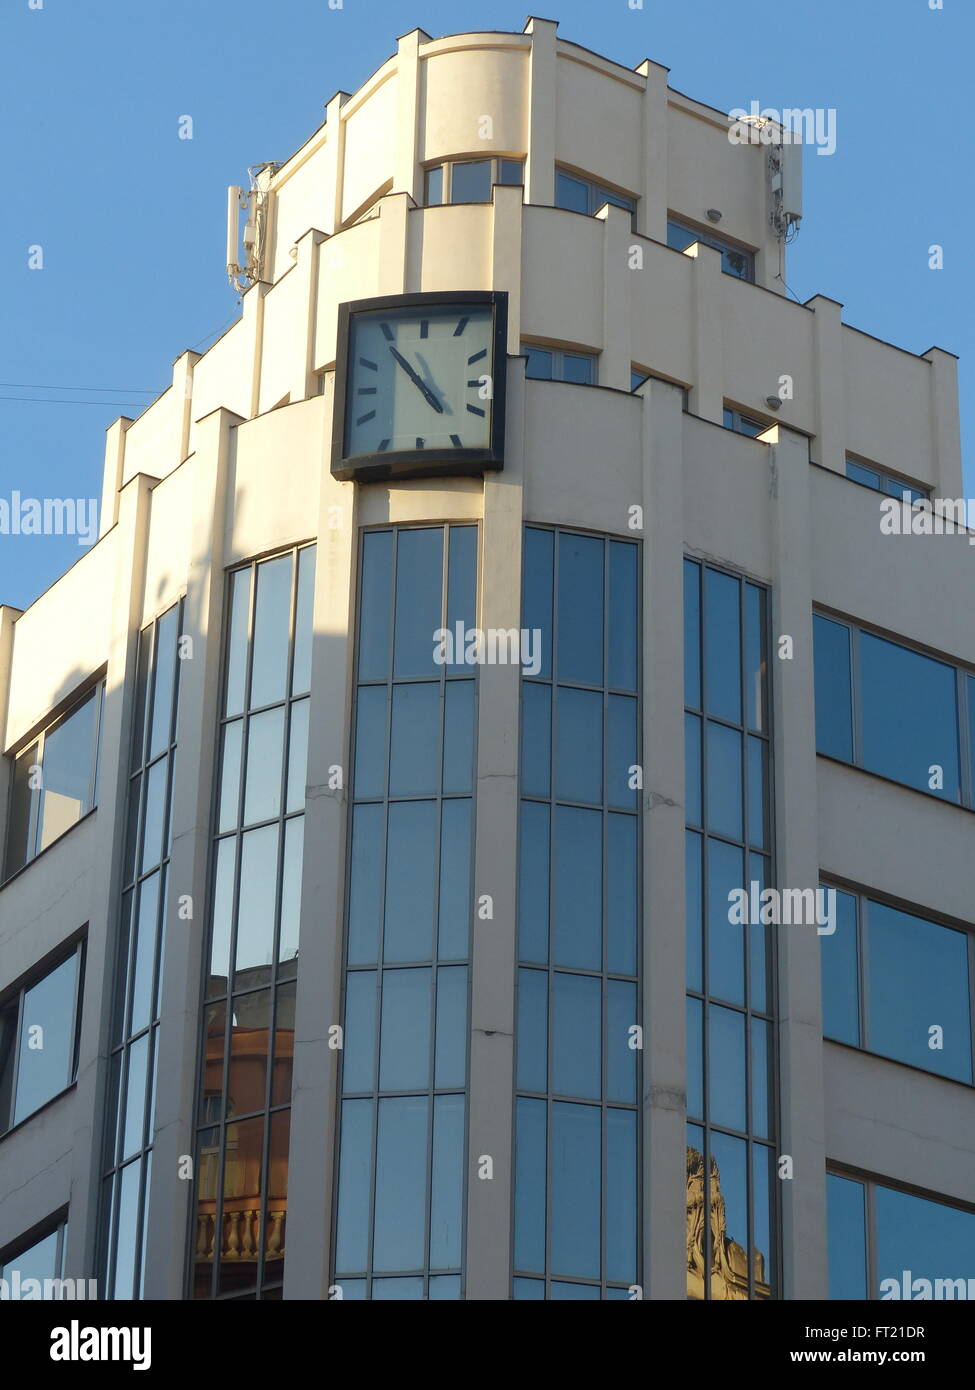 The Palac Ara is an office block in the style of Functionalism with a dose of Art Deco, the former being particularly prevalent in Czech. Stock Photo